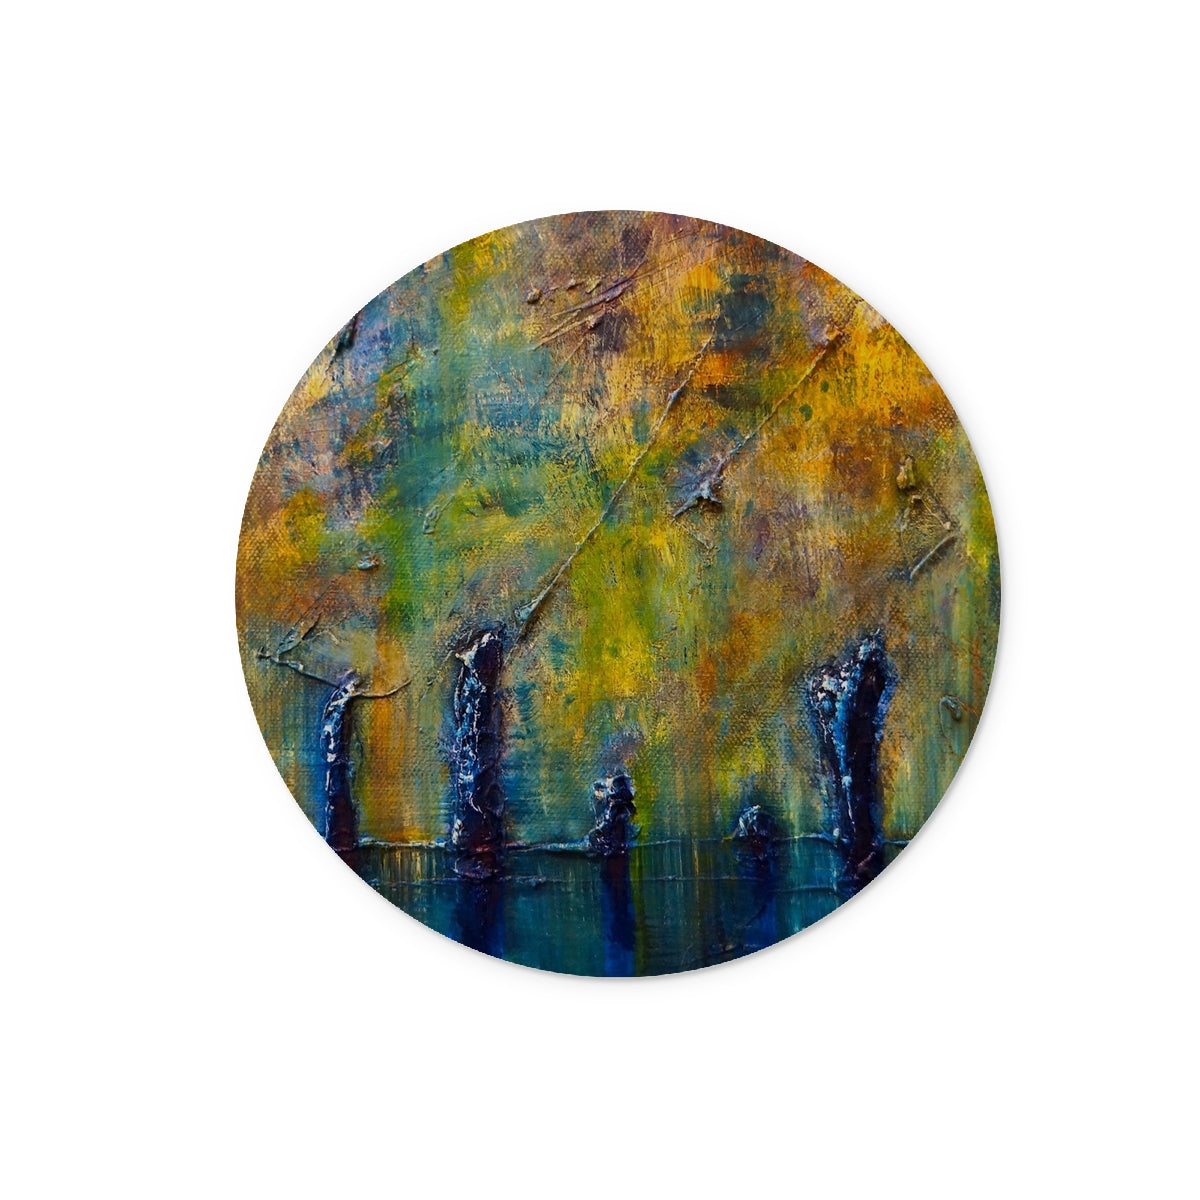 Stenness Moonlight Orkney Art Gifts Glass Chopping Board-Glass Chopping Boards-Orkney Art Gallery-12" Round-Paintings, Prints, Homeware, Art Gifts From Scotland By Scottish Artist Kevin Hunter